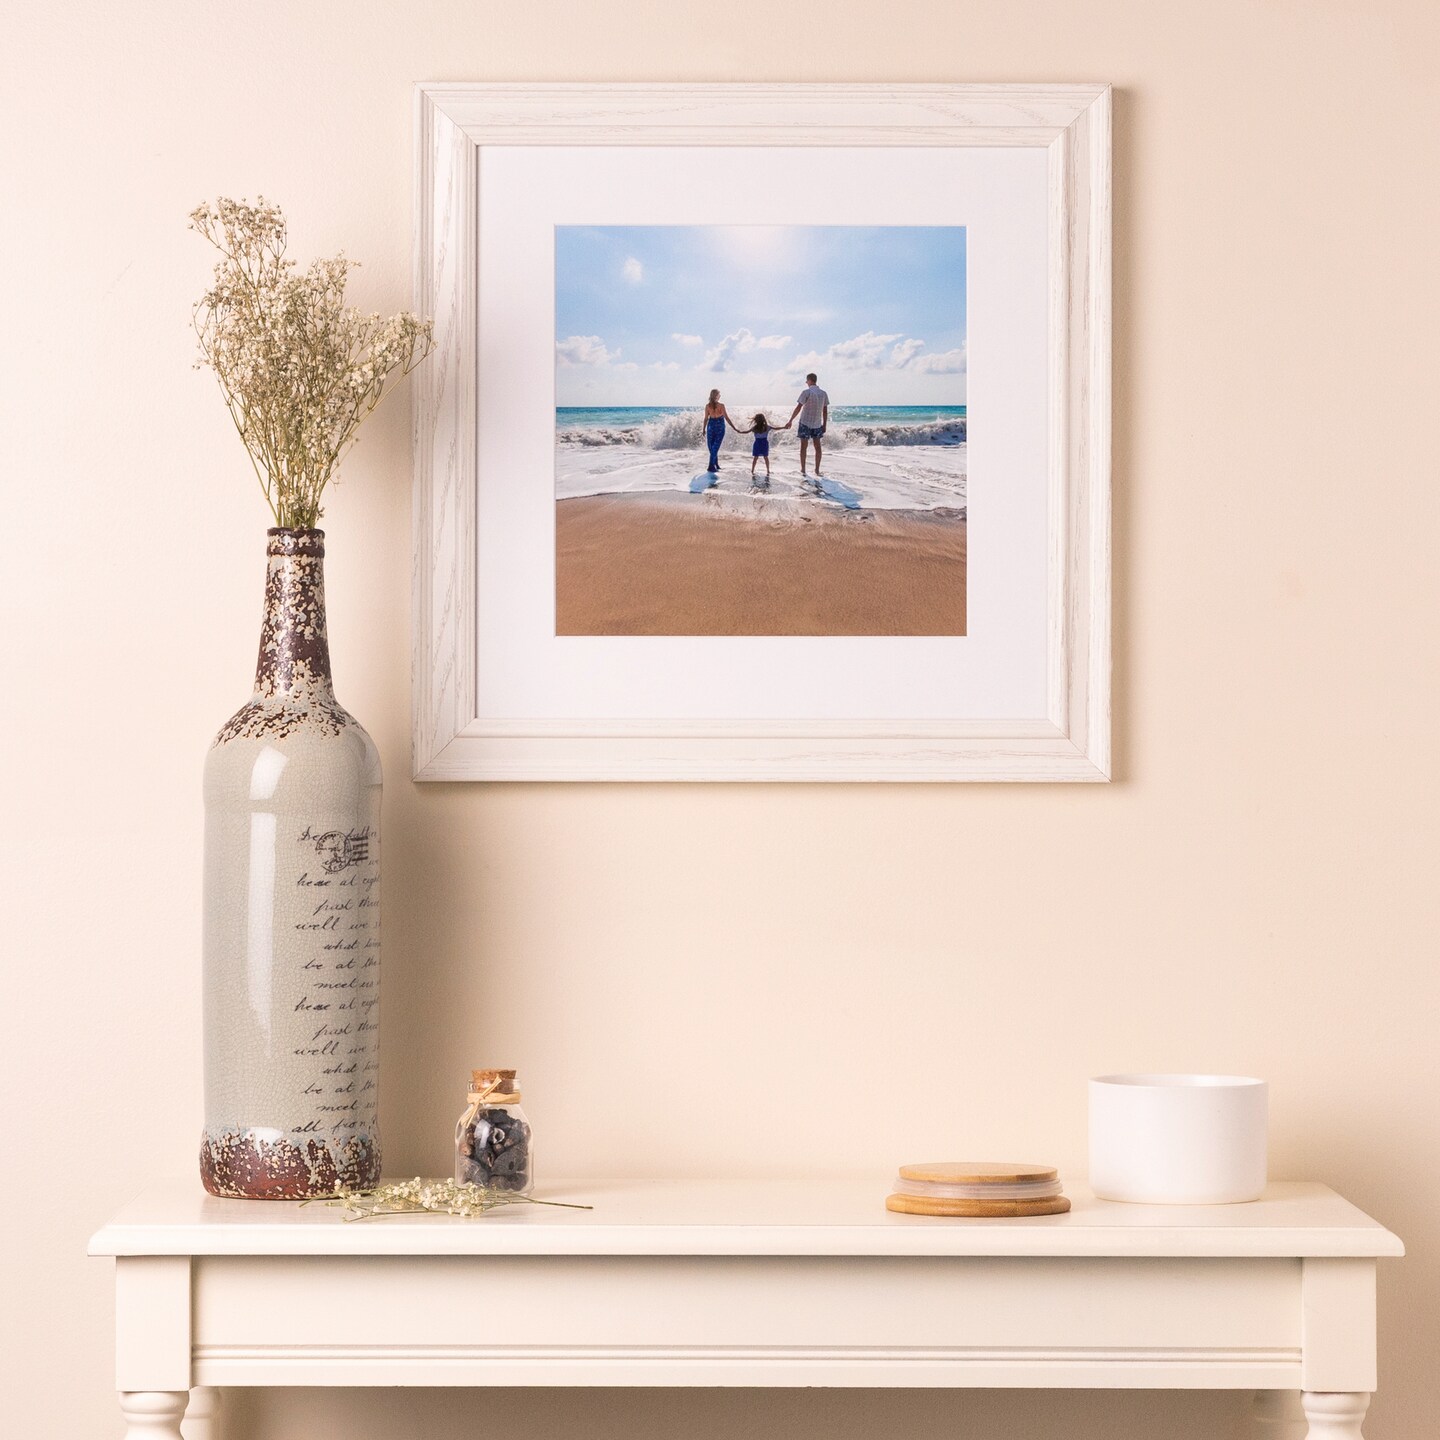 ArtToFrames 24x24 Inch  Picture Frame, This 1.5 Inch Custom Wood Poster Frame is Available in Multiple Colors, Great for Your Art or Photos - Comes with 060 Plexi Glass and  Corrugated Backing (A14RC)